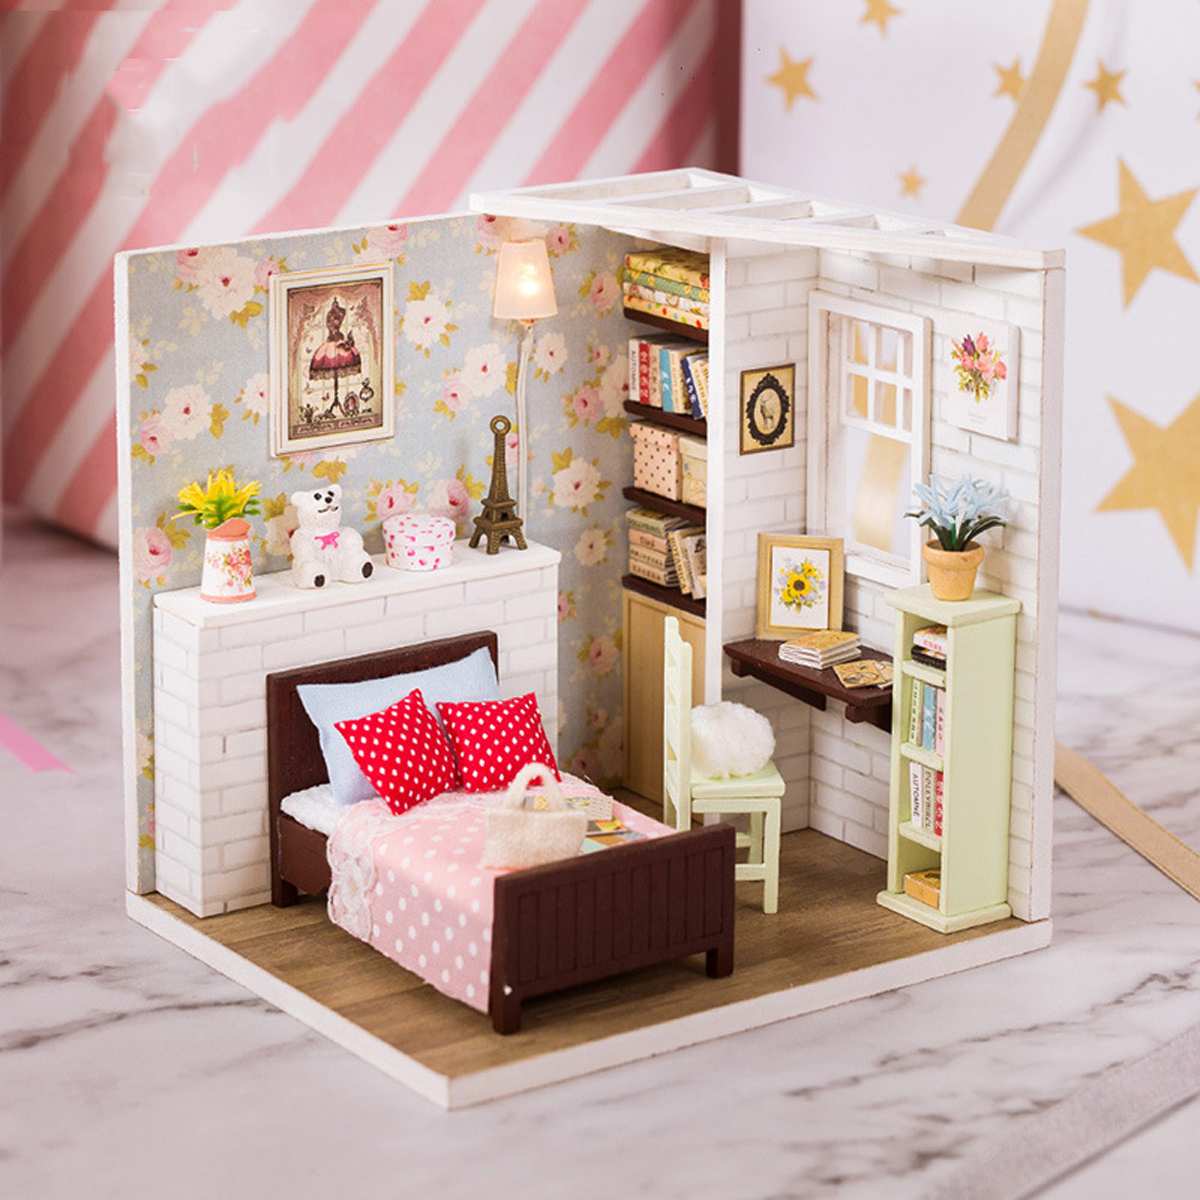 Wooden-3D-DIY-Handmade-Assemble-Doll-House-Miniature-Kit-with-Furniture-LED-Light-Education-Toy-for--1731374-3